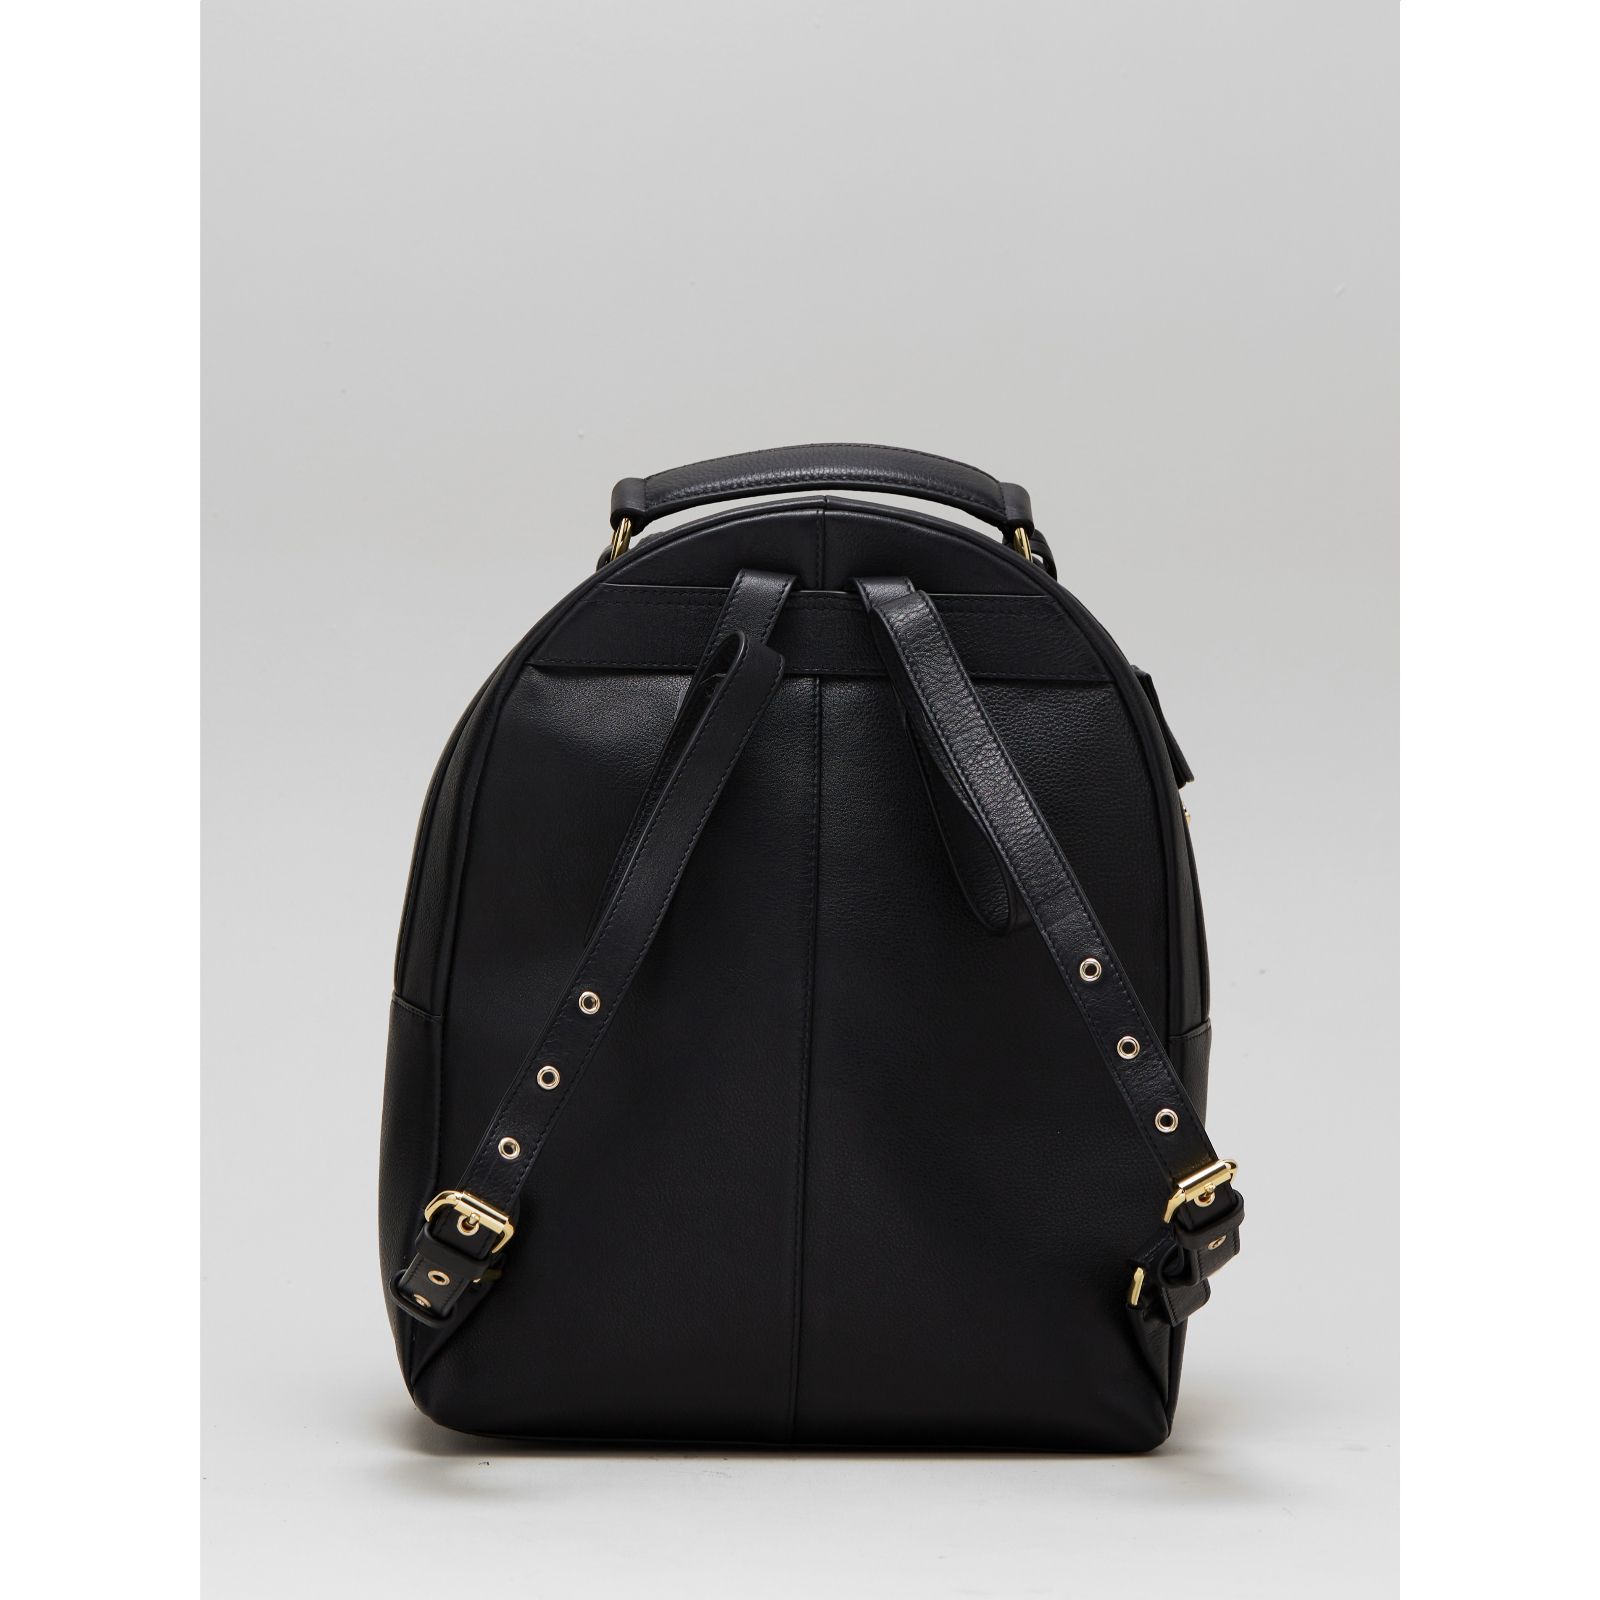 Radley London Witham Road Leather Backpack - QVC UK